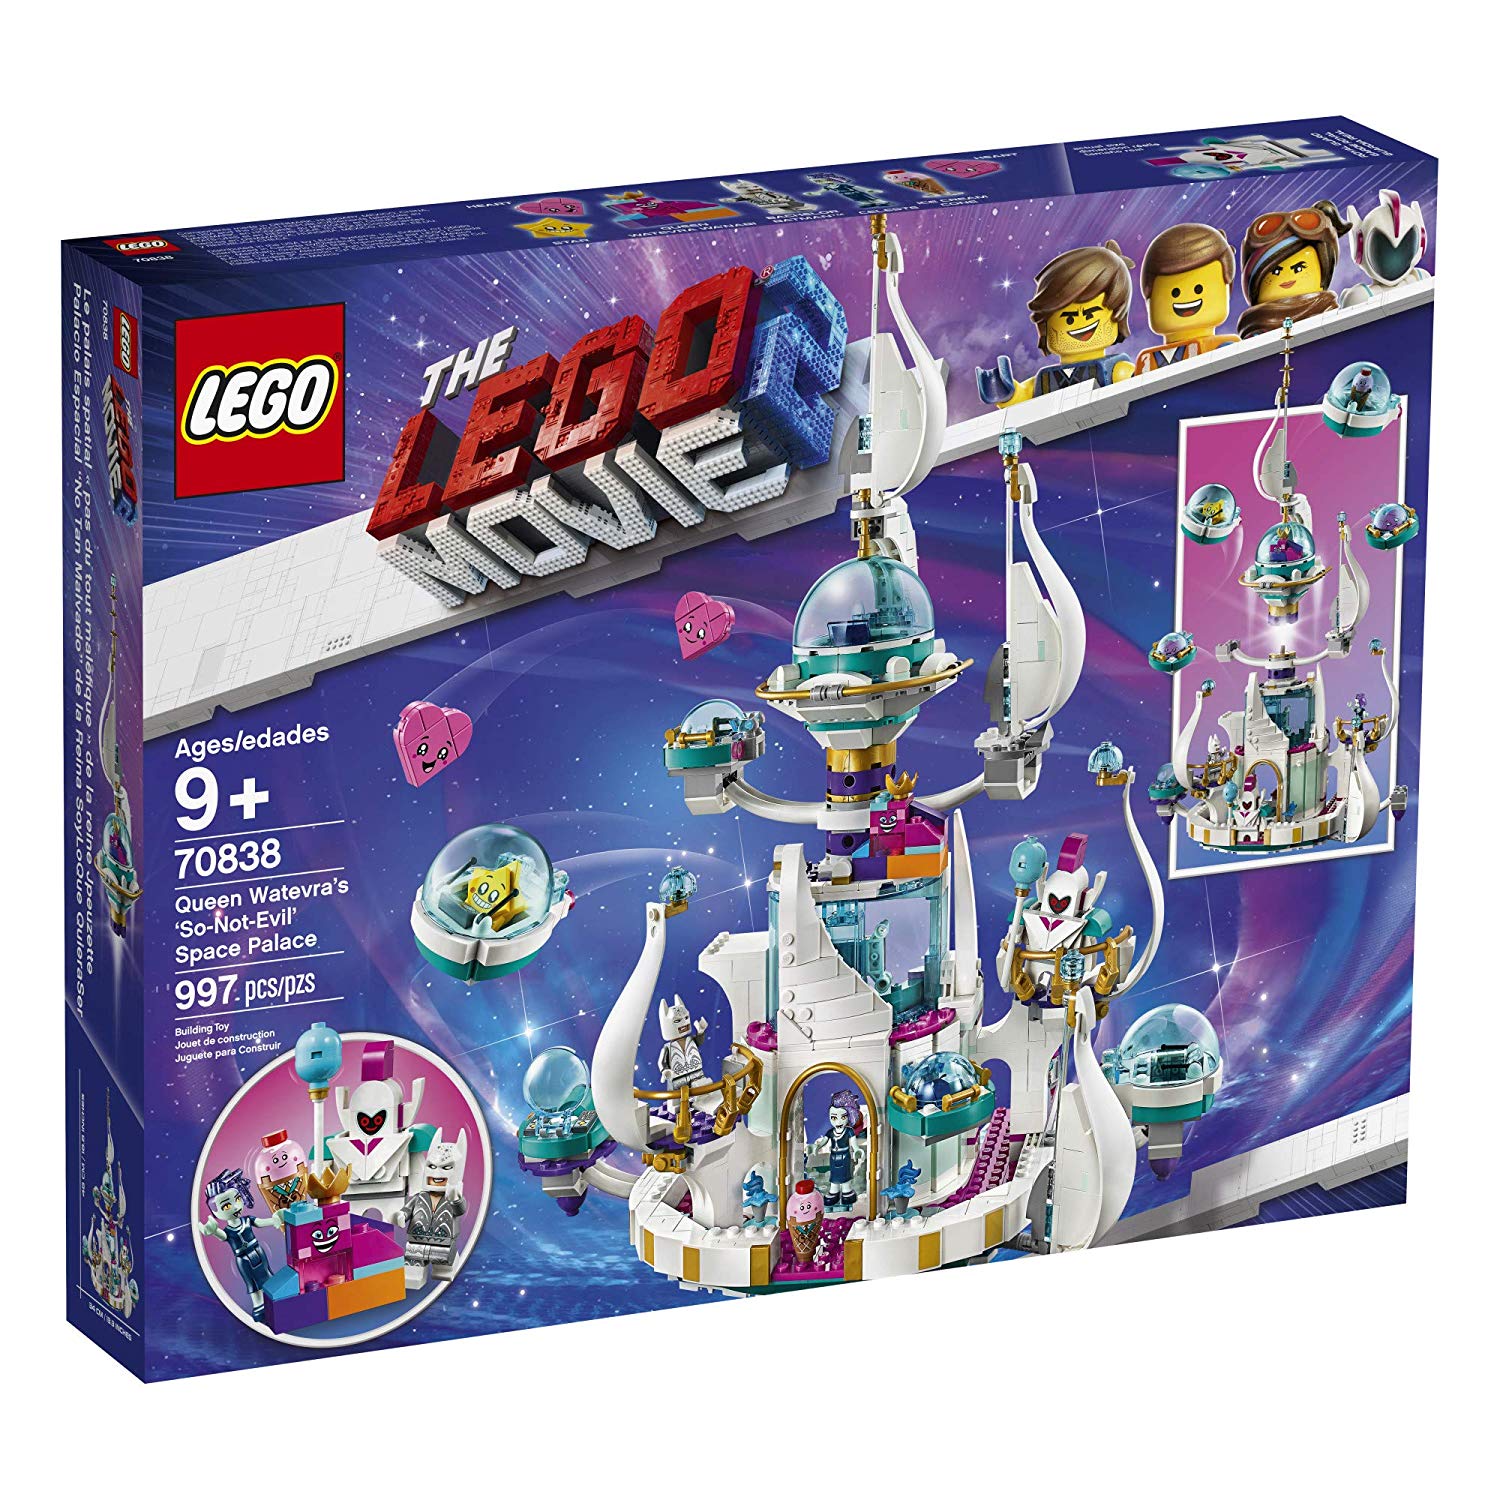 en anden mælk Malawi LEGO® 70838 THE LEGO® MOVIE 2™ Queen Watevra's 'So-Not-Evil' Space Pal –  AESOP'S FABLE